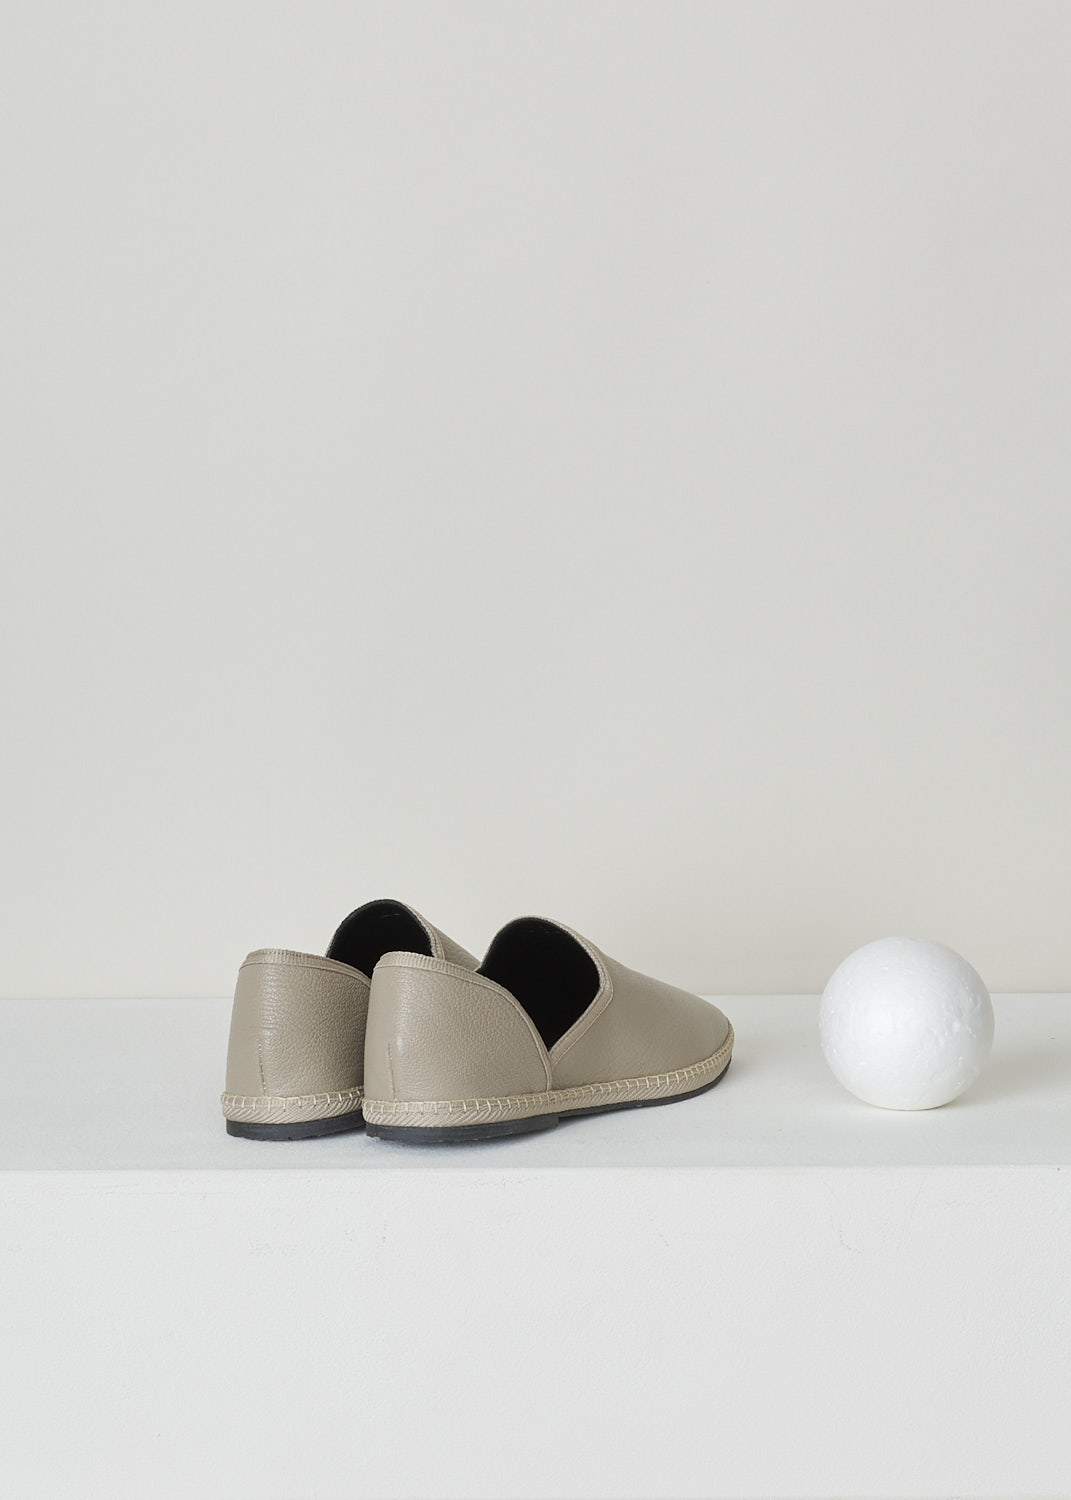 THE ROW, GREY GRAINED LEATHER SLIPPERS, FRIULANE_SLIPPER_NUAGE_F1146A_L36_NUA, Grey, Back, Minimalistic grey colored grain leather slipper. The slip-in model features a rounded toe vamp. 
